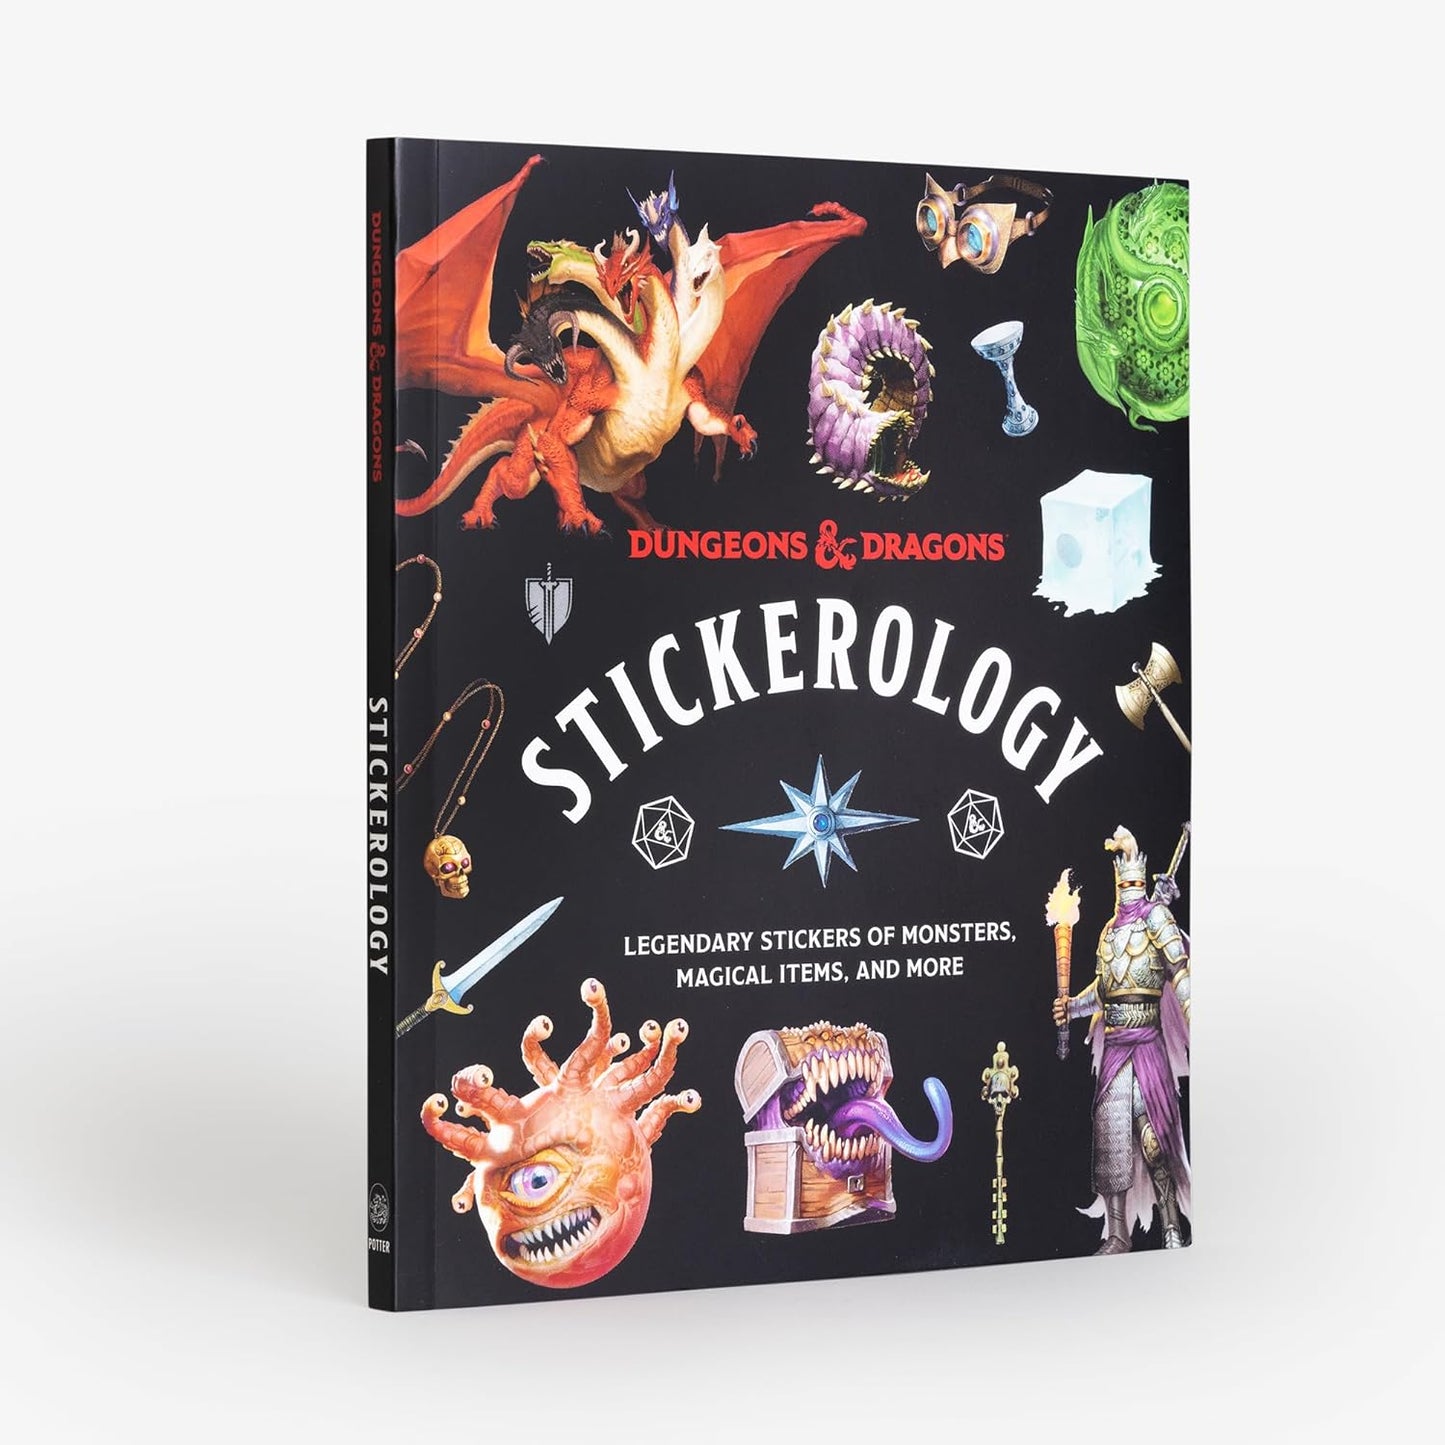 Dungeons & Dragons Stickerology: Legendary Stickers of Monsters, Magical Items, and More